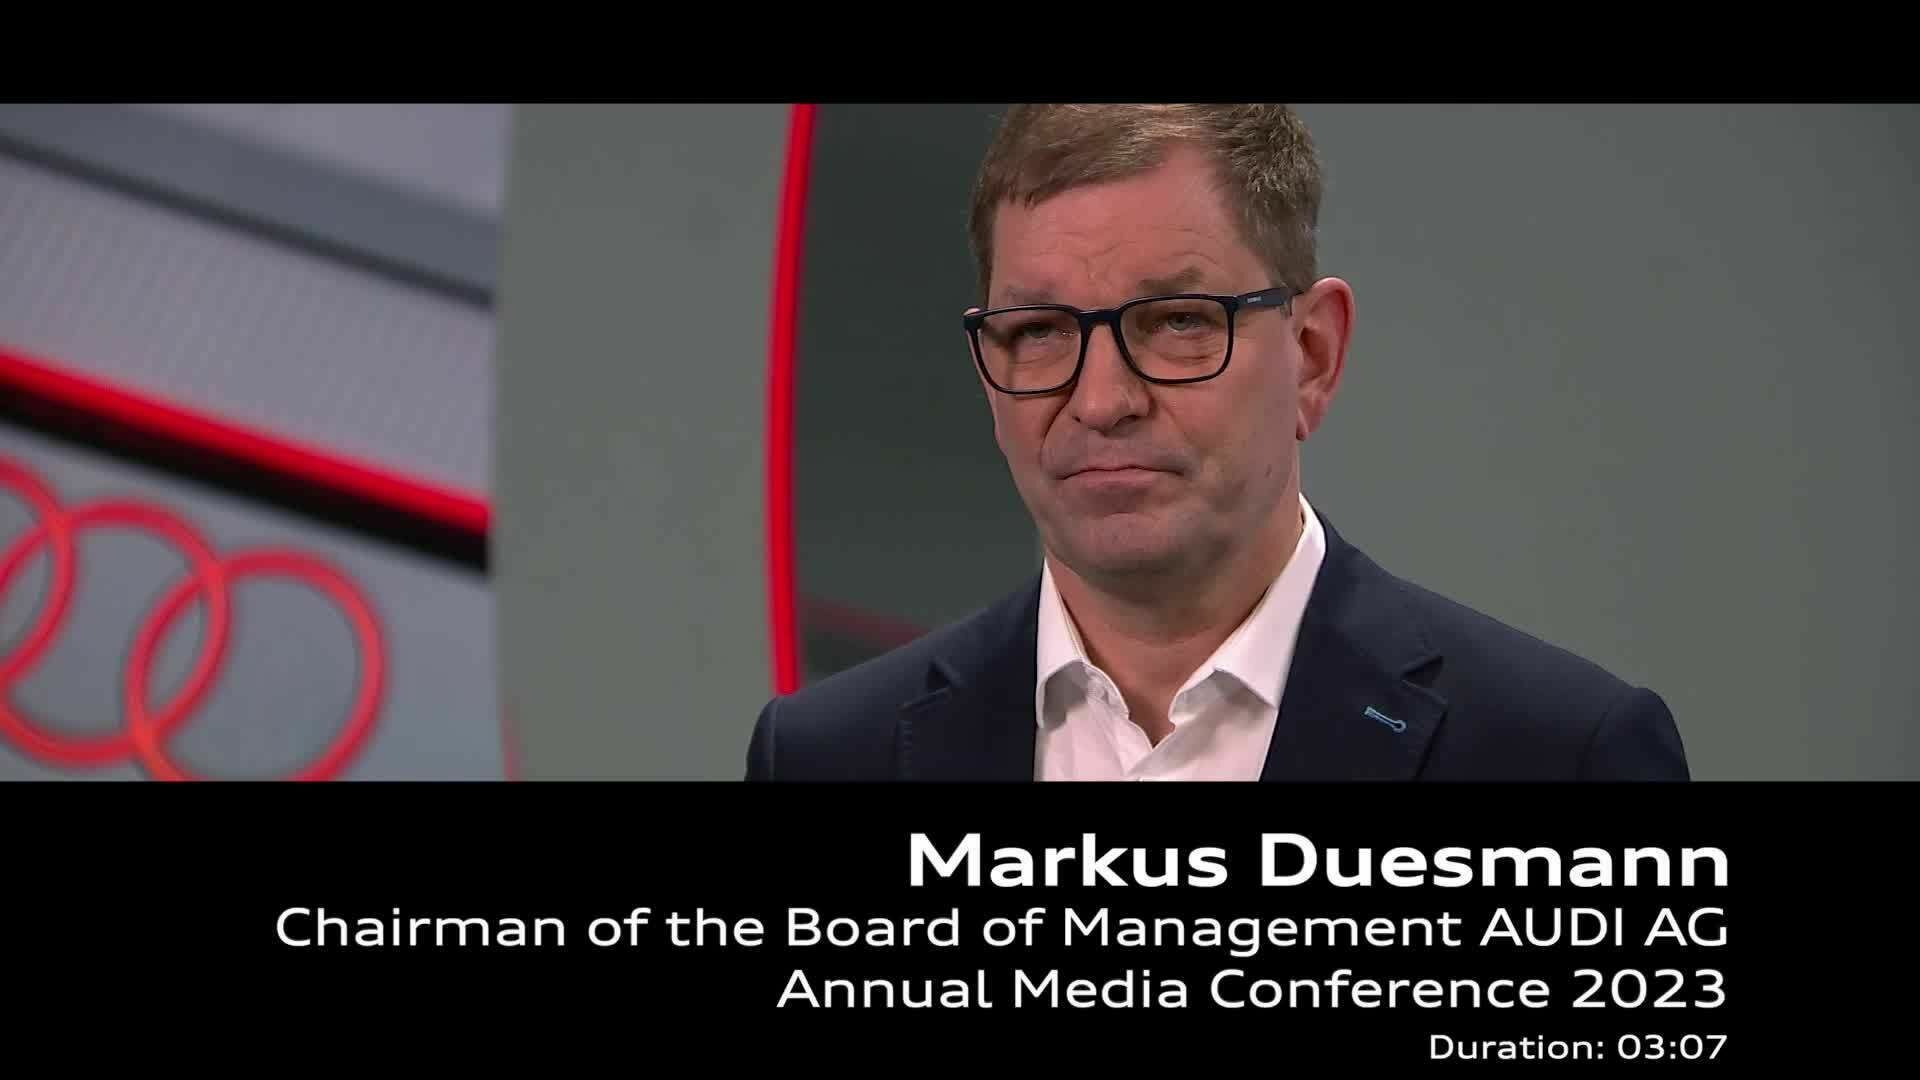 Footage: Statement from Markus Duesmann at the Audi Annual Media Conference 2023